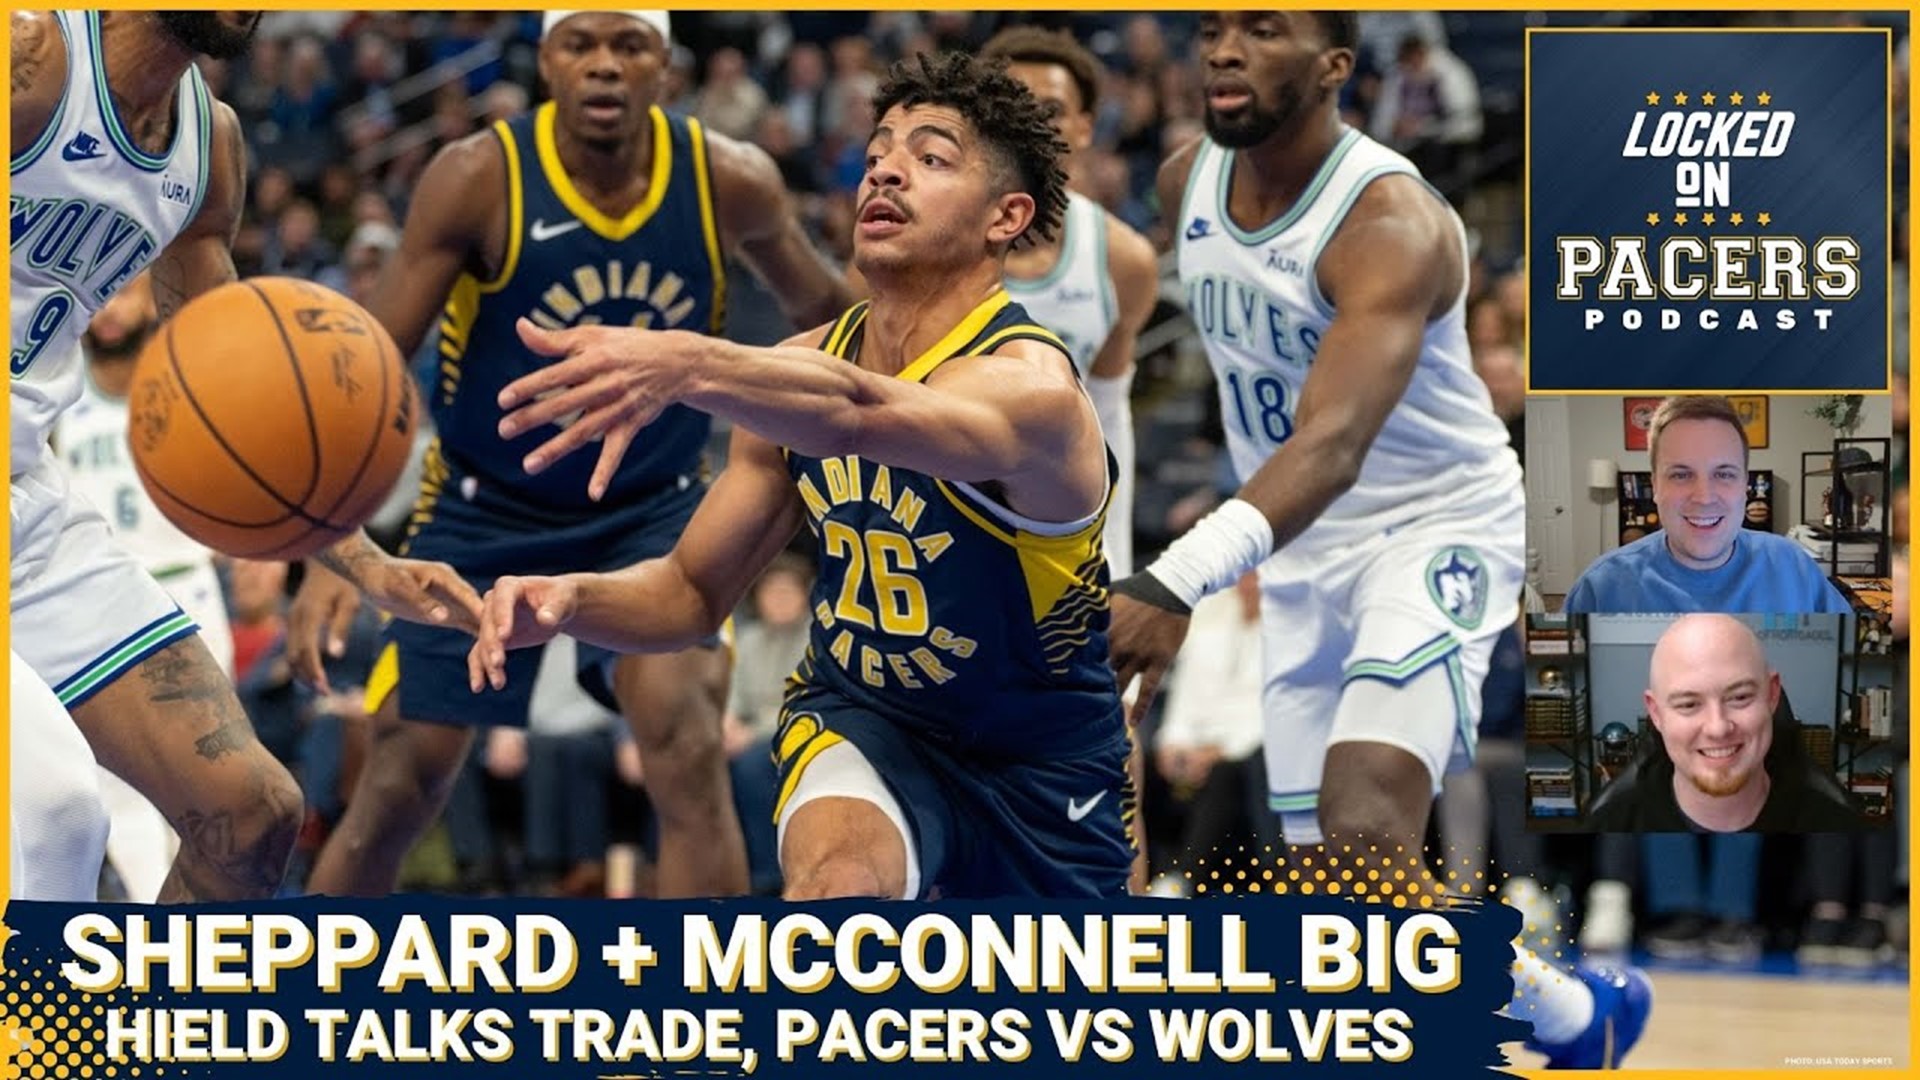 Why T.J. McConnell & Ben Sheppard have become important for Indiana Pacers. Buddy Hield talks trade